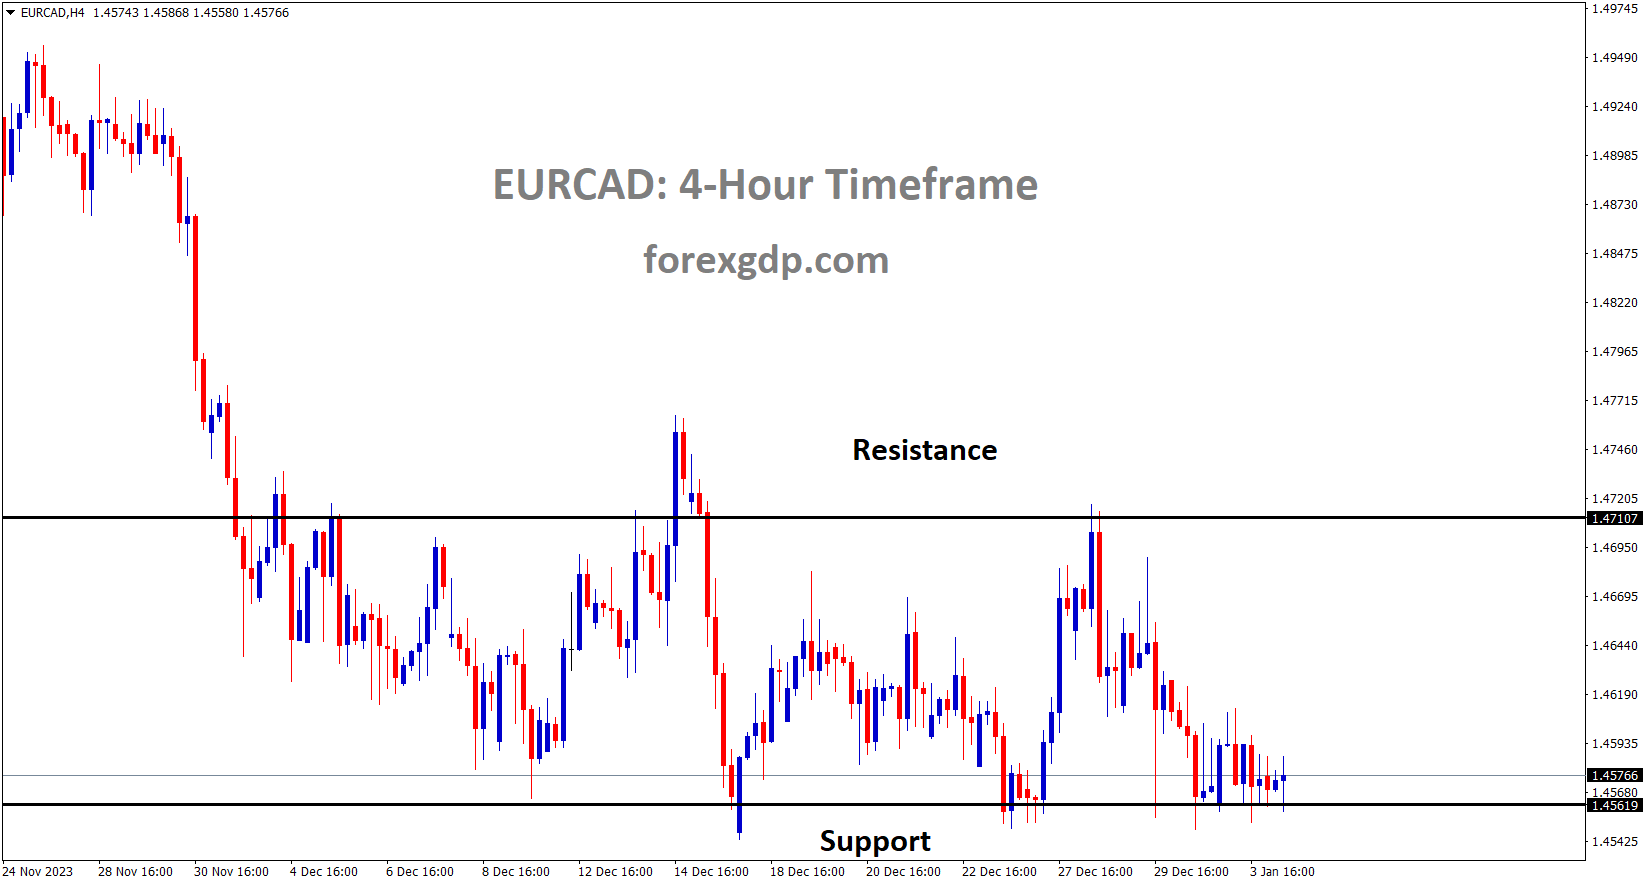 EURCAD is moving in the Box pattern and the market has reached the support area of the pattern